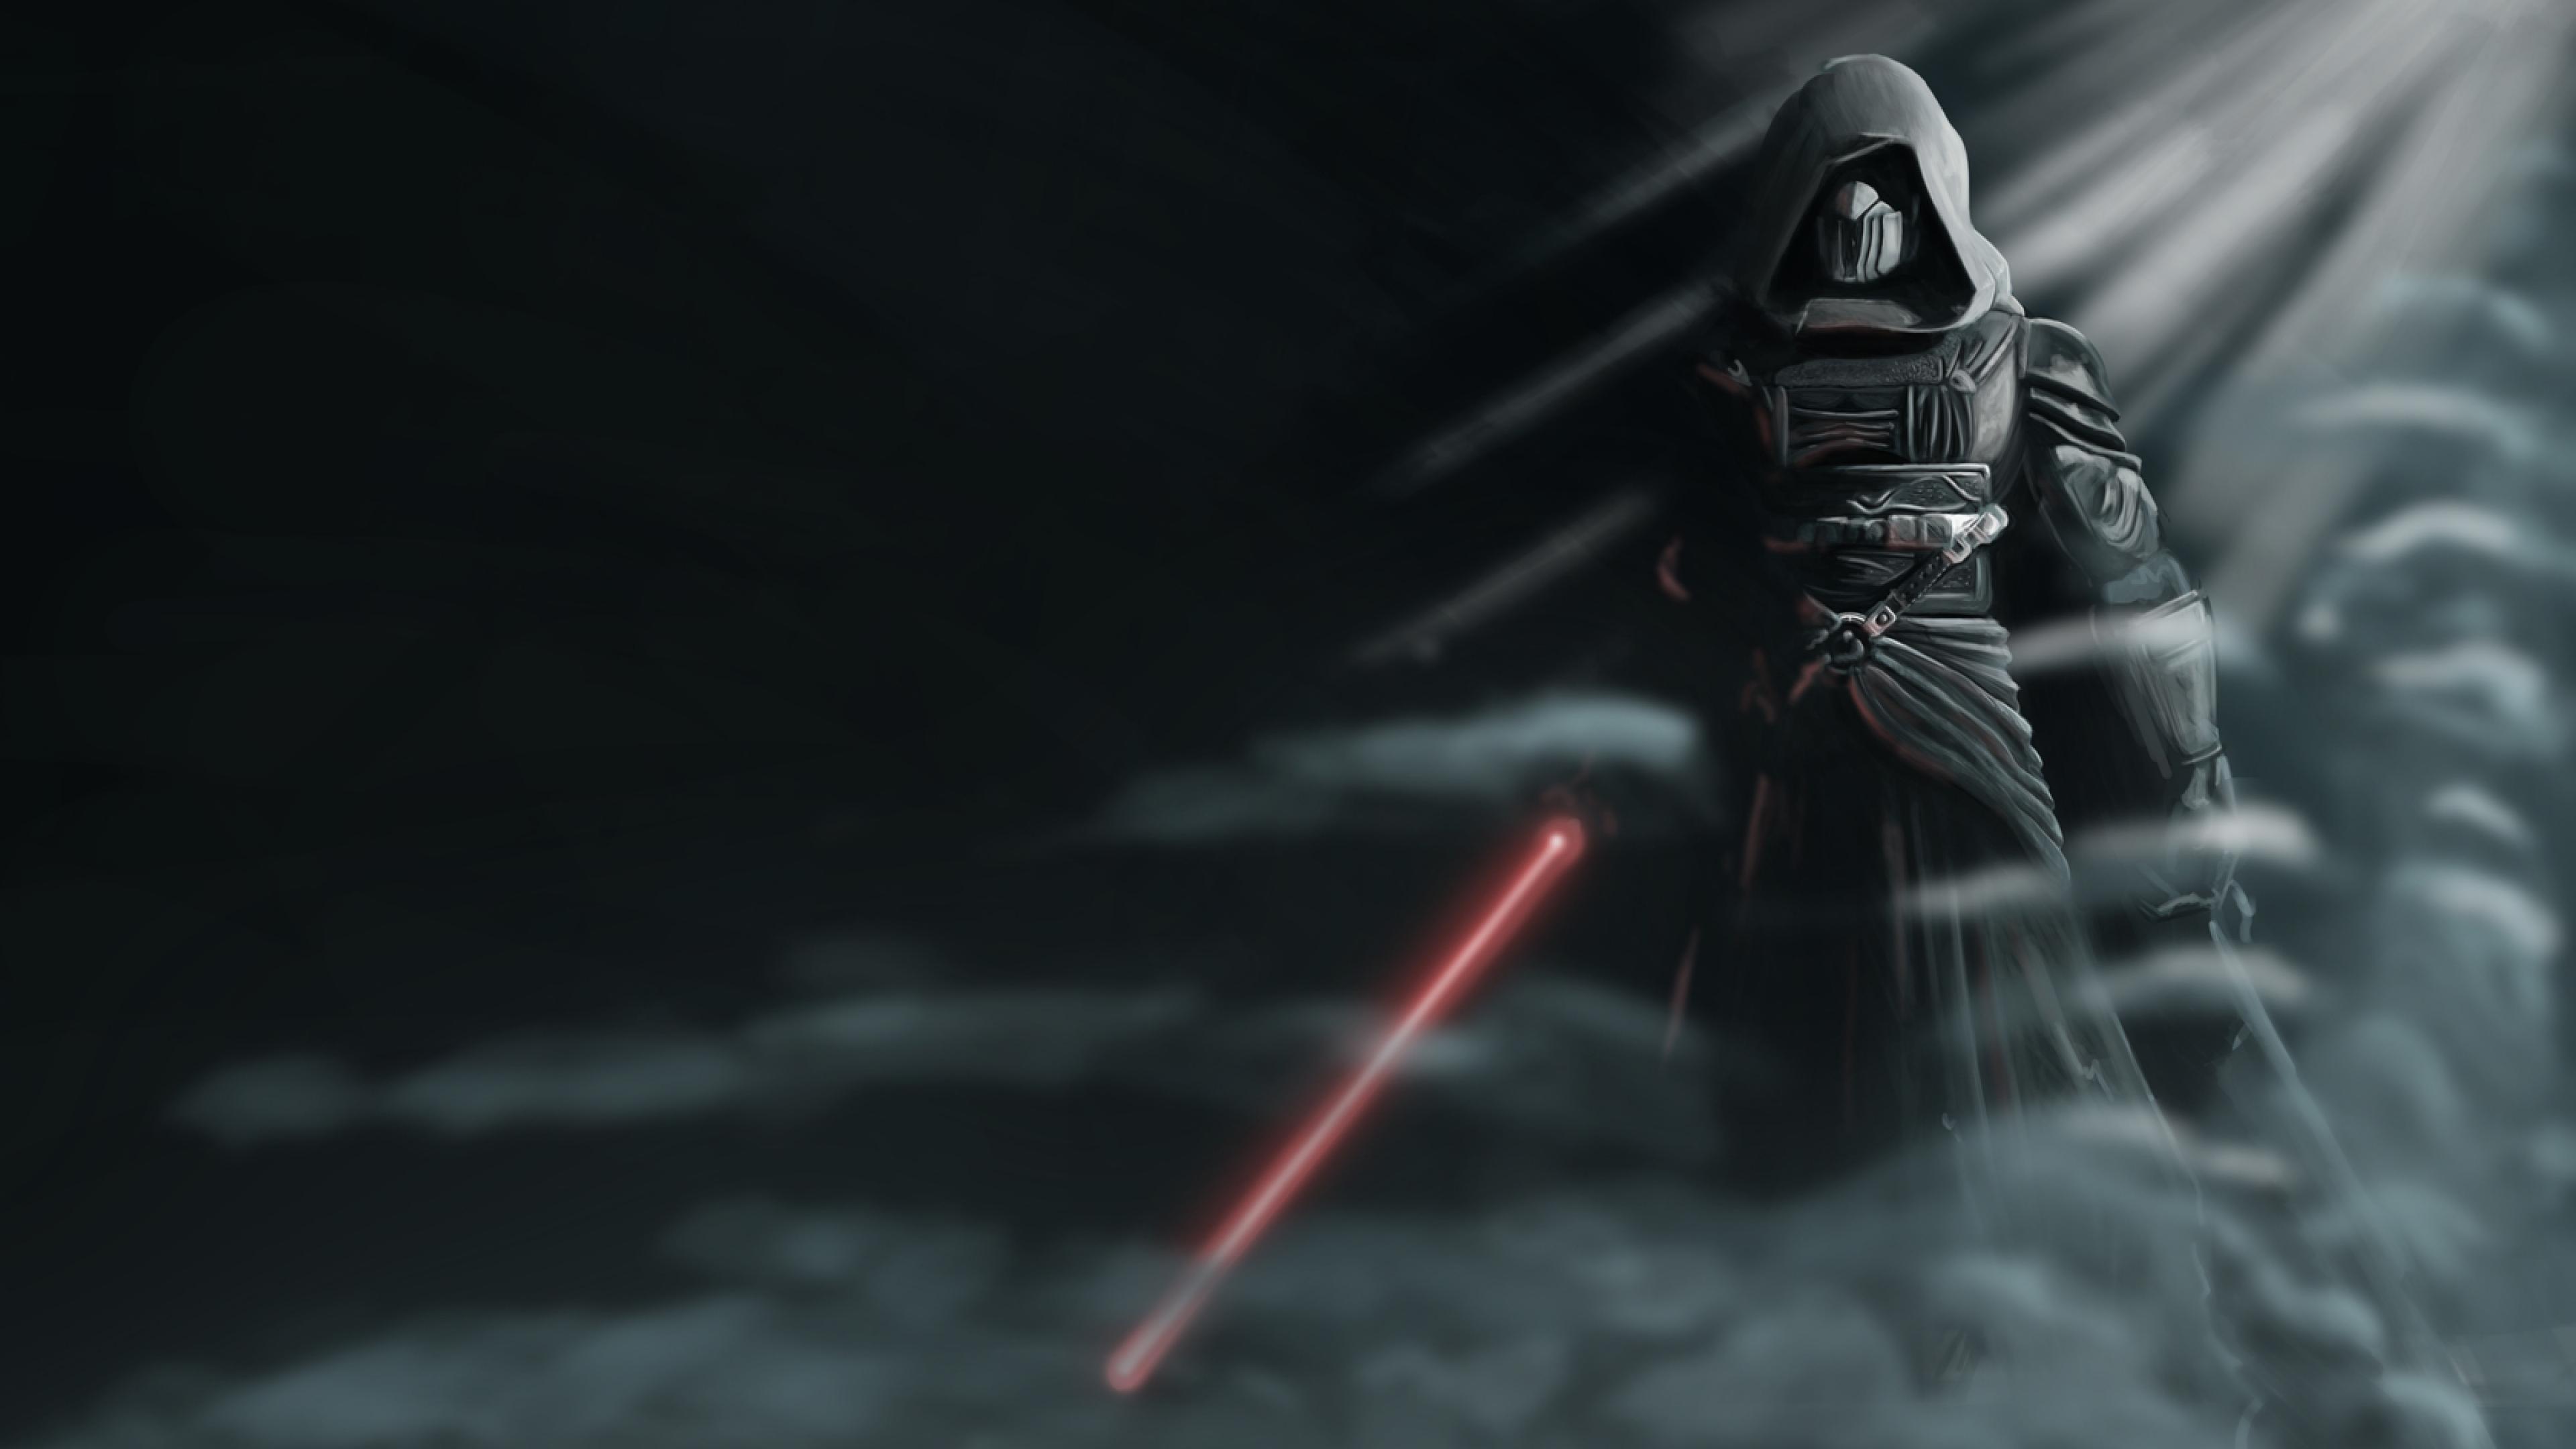 QHD Star Wars Wallpaper Episode Vii The Force Awakens Is